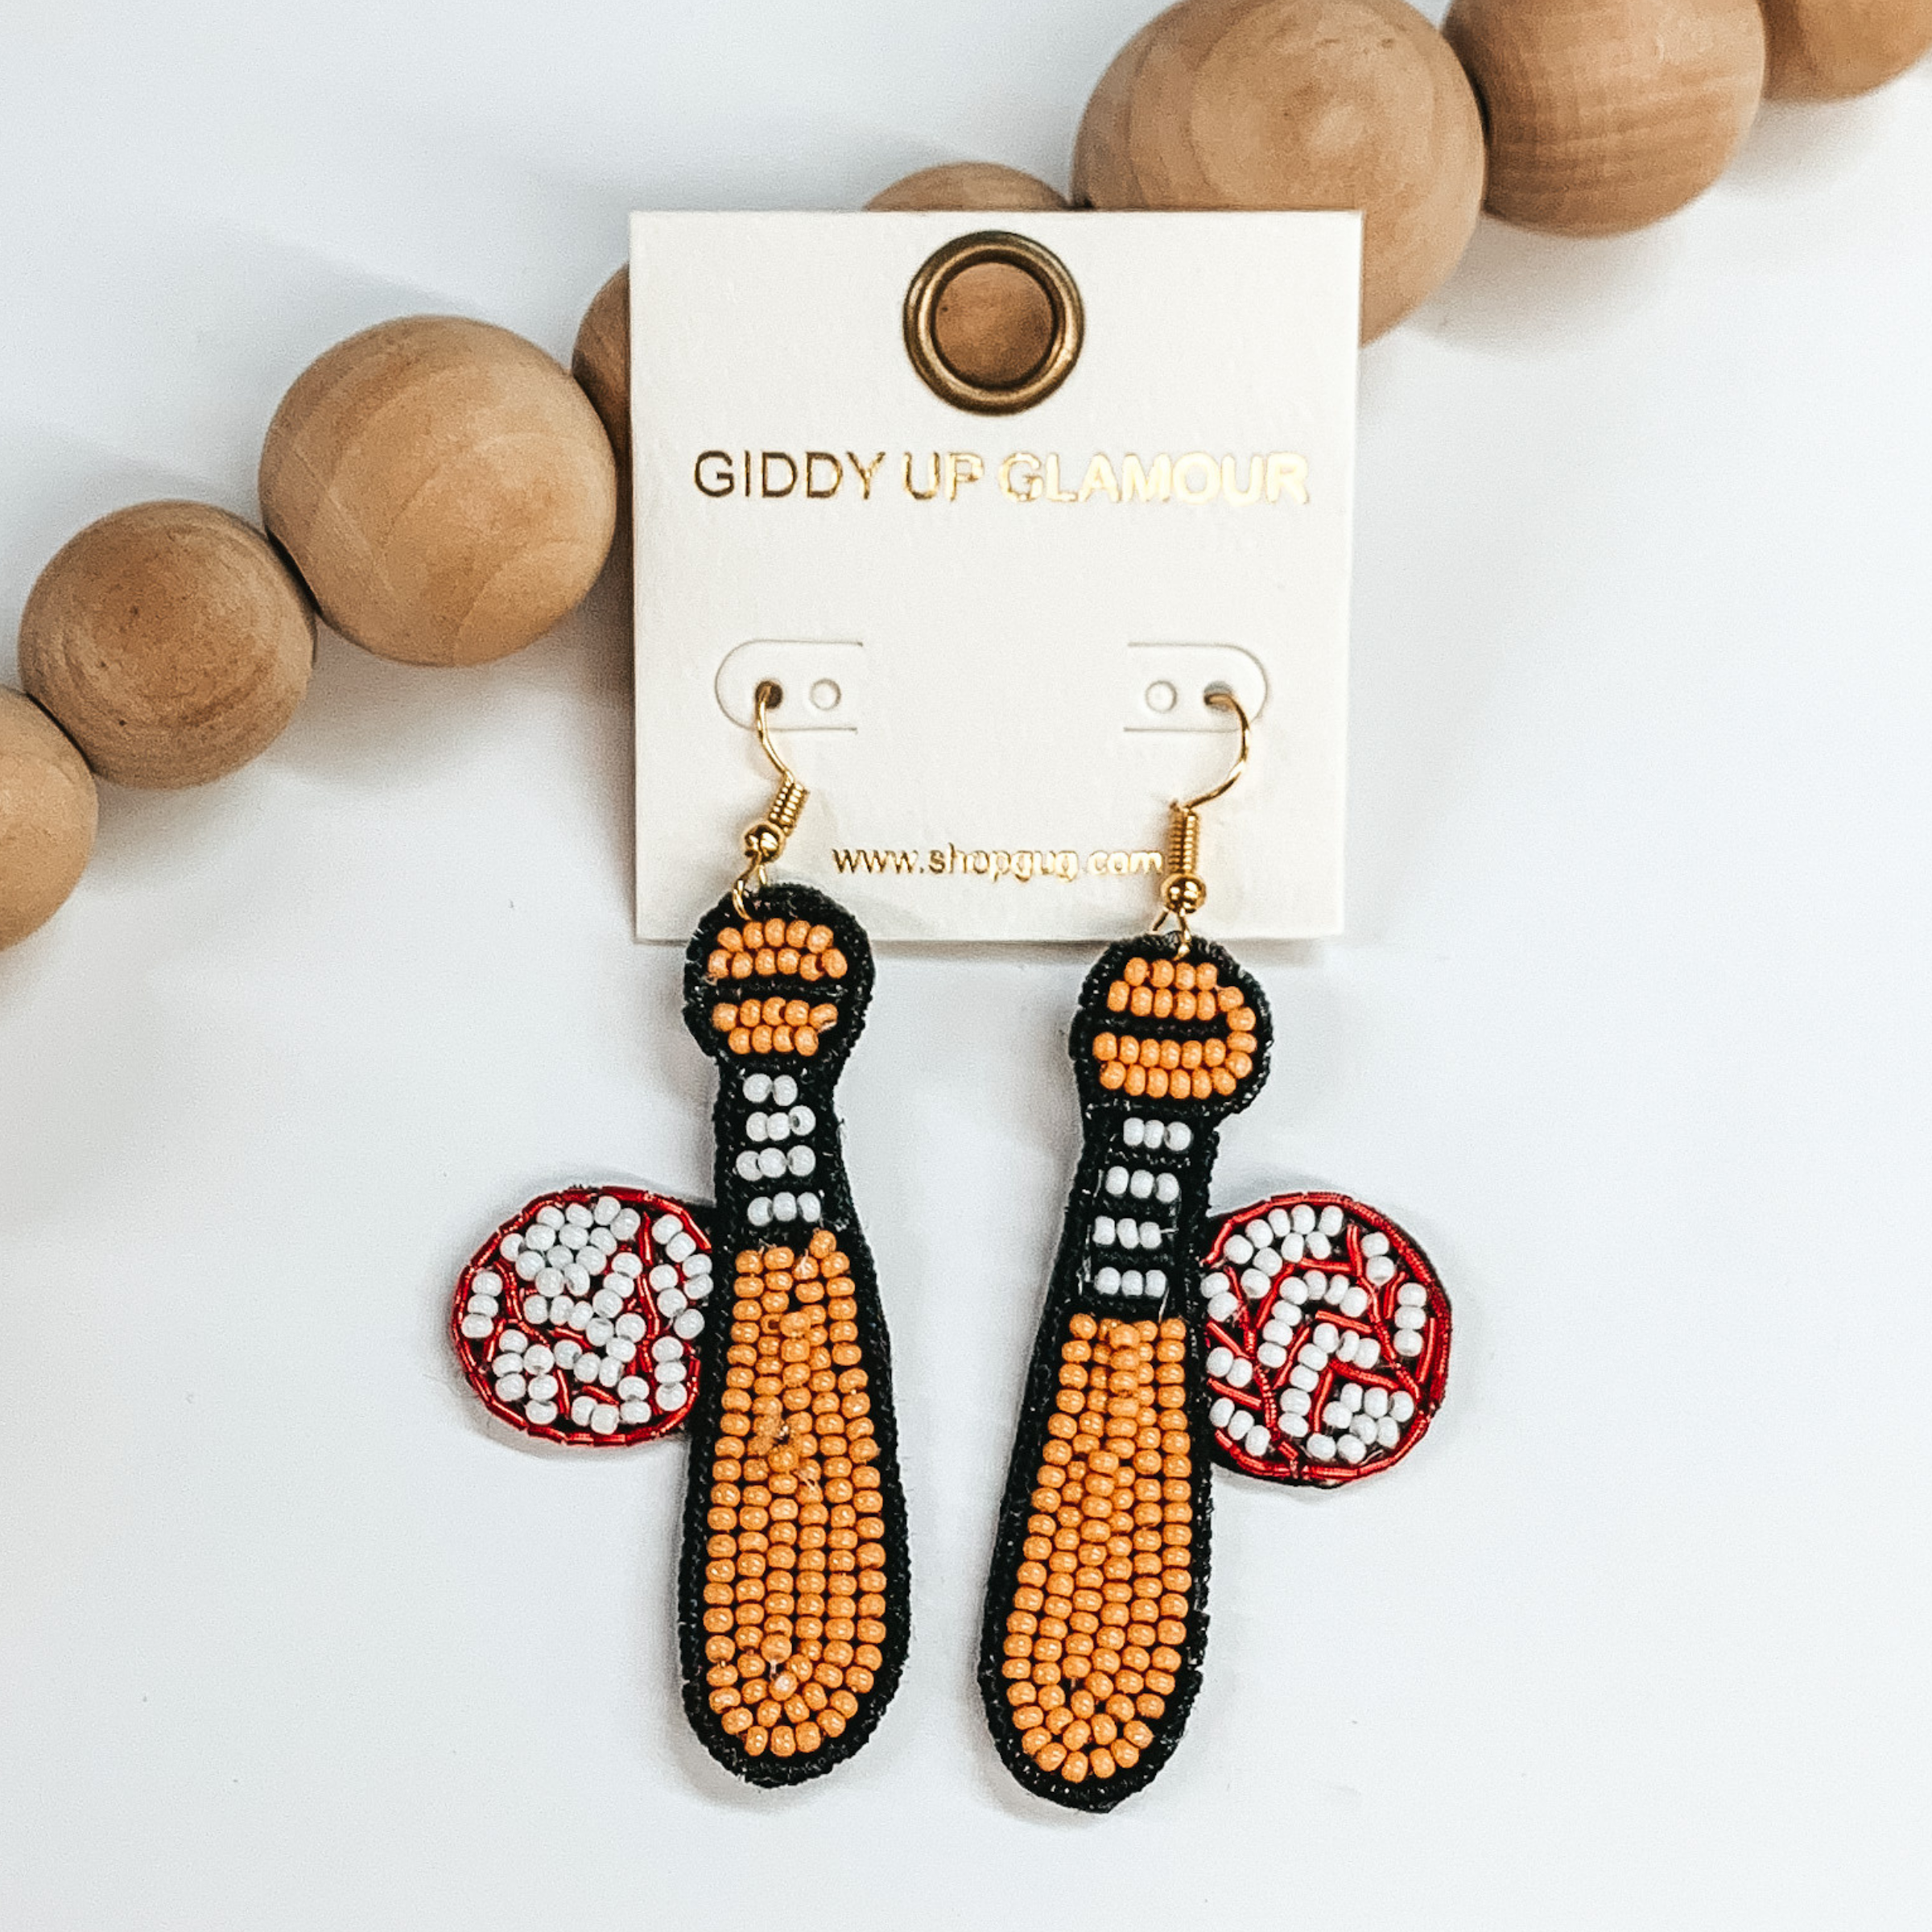 Play Ball! Seed Bead Baseball and Bat Earrings - Giddy Up Glamour Boutique